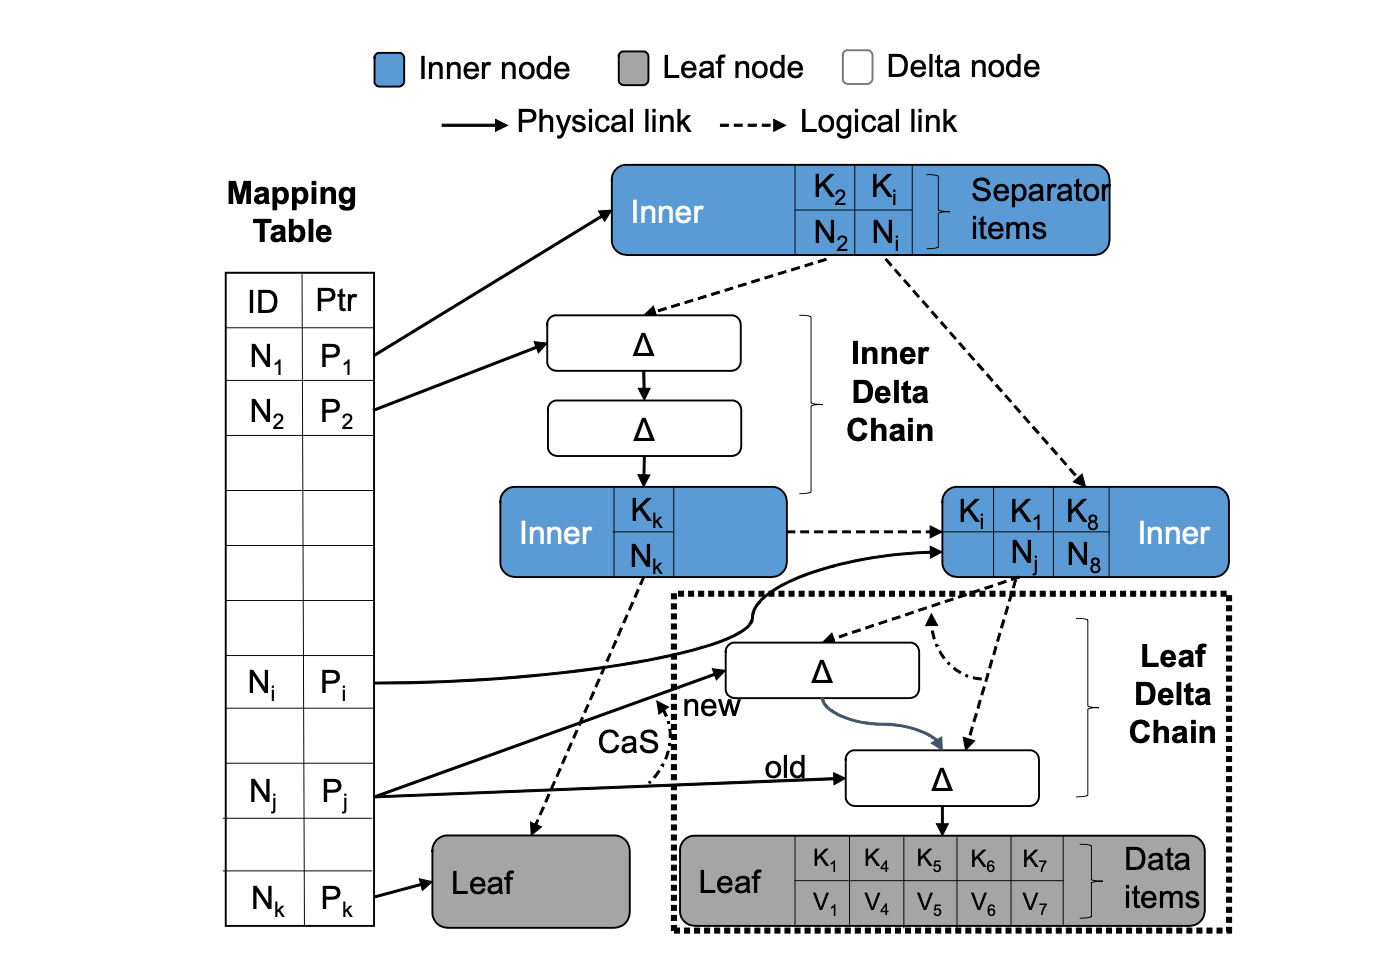  **Architecture Overview** – An instance of a Bw-Tree with its internal logical links, Mapping Table links, and an ongoing CaS operation on the leaf Delta Chain.